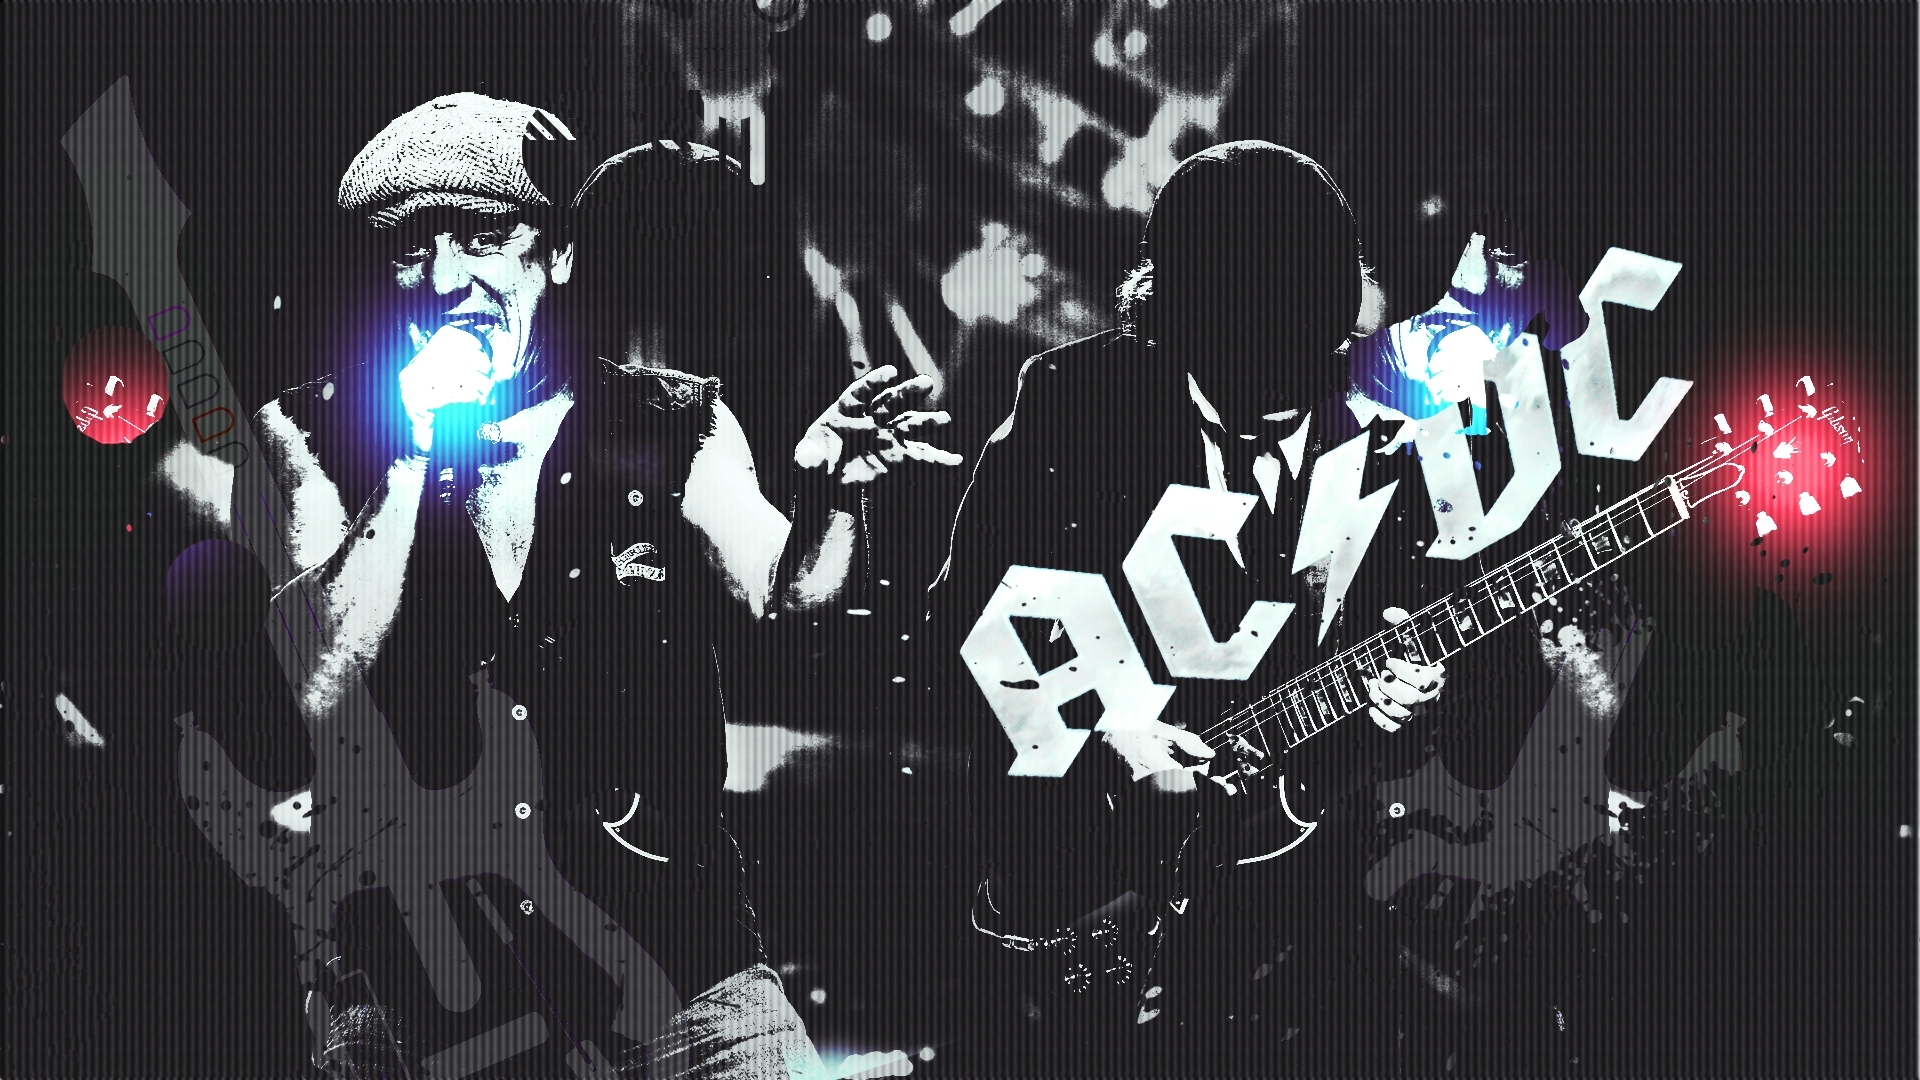 ac dc, Ac, Dc, Acdc, Heavy, Metal, Hard, Rock, Classic, Bands, Groups, Entertainment, Men, People, Male, Logo, Album, Covers Wallpaper